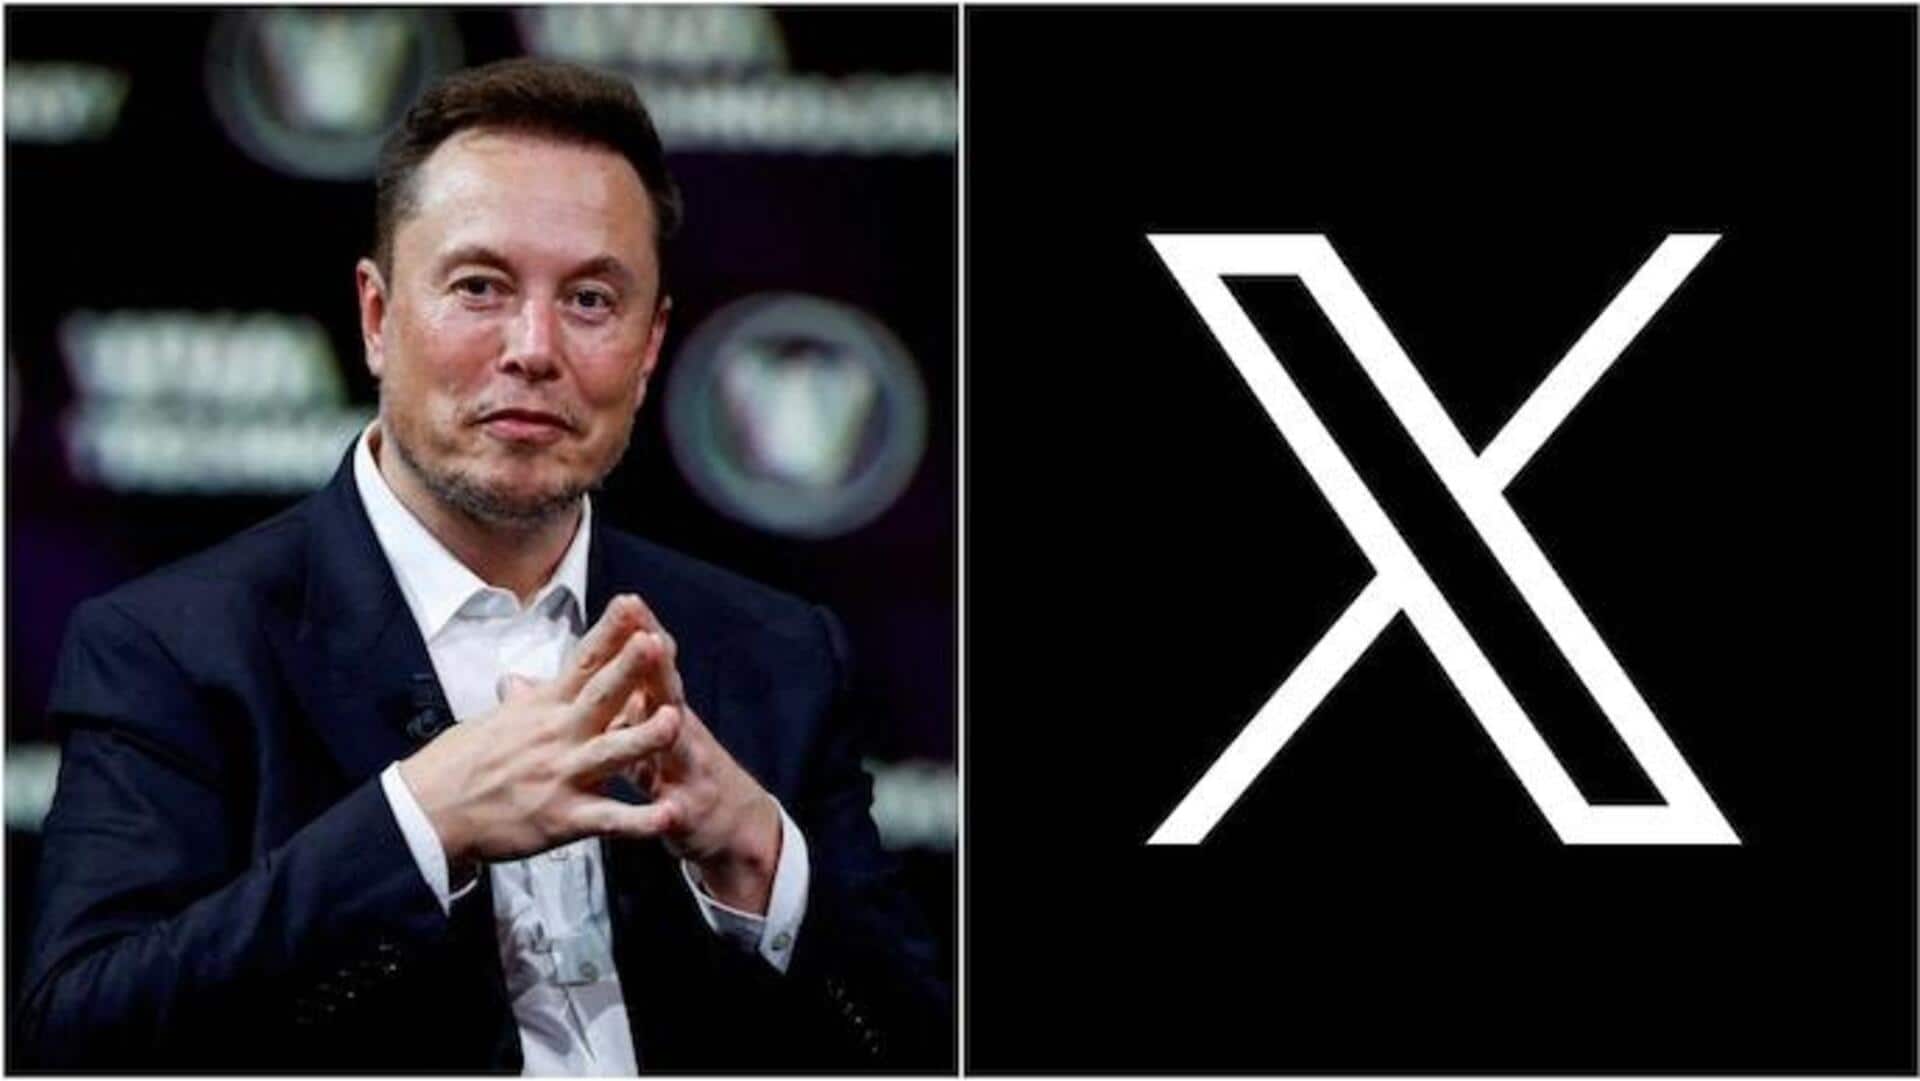 Musk's X aims for financial disruption with new payment system